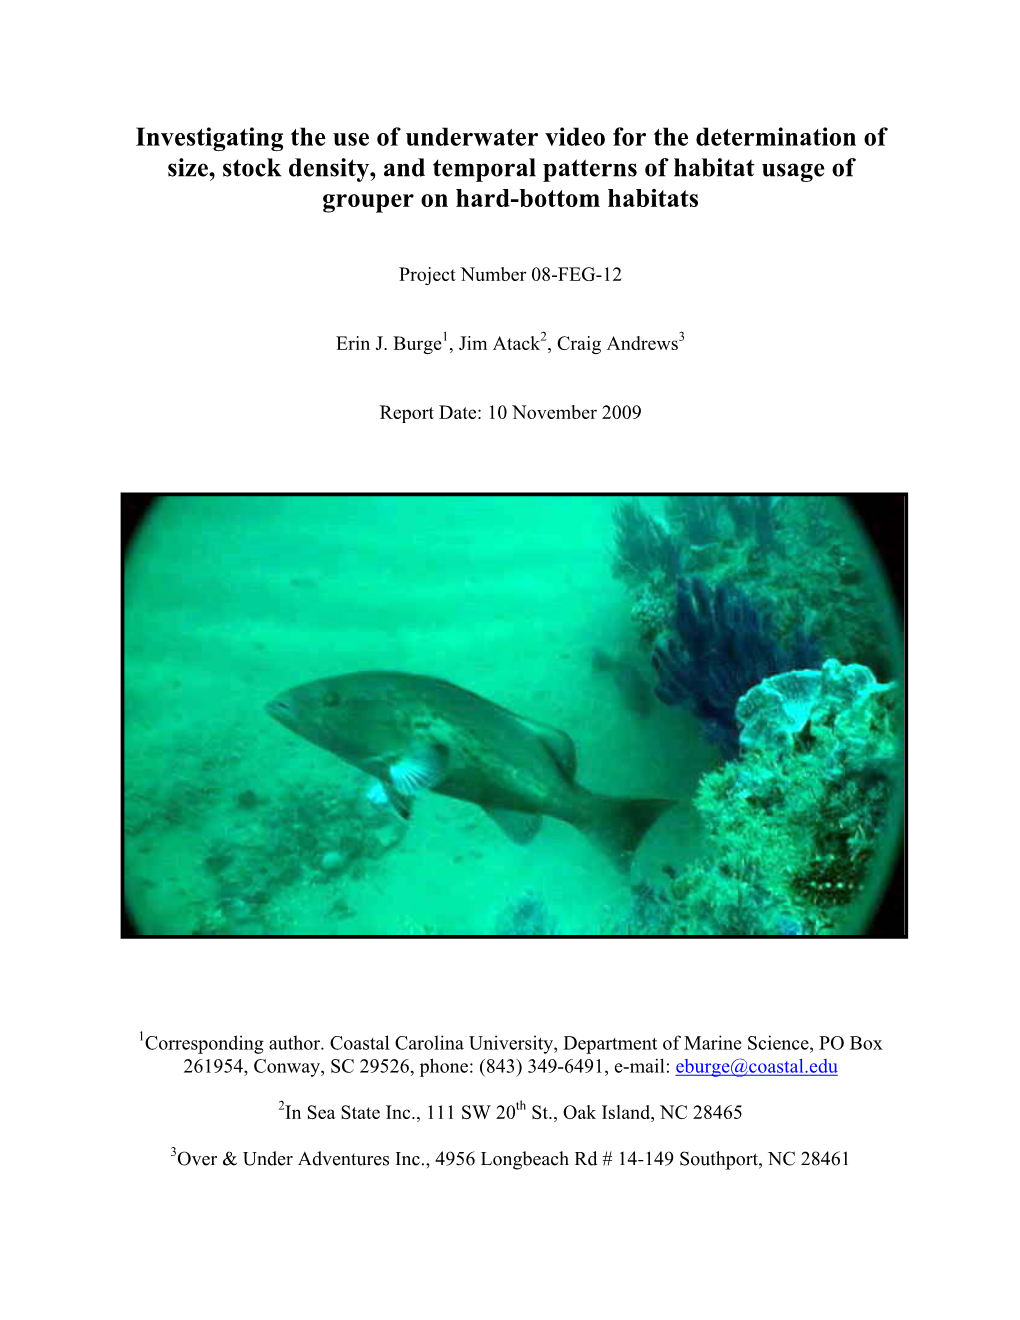 Investigating the Use of Underwater Video for the Determination of Size, Stock Density, and Temporal Patterns of Habitat Usage of Grouper on Hard-Bottom Habitats